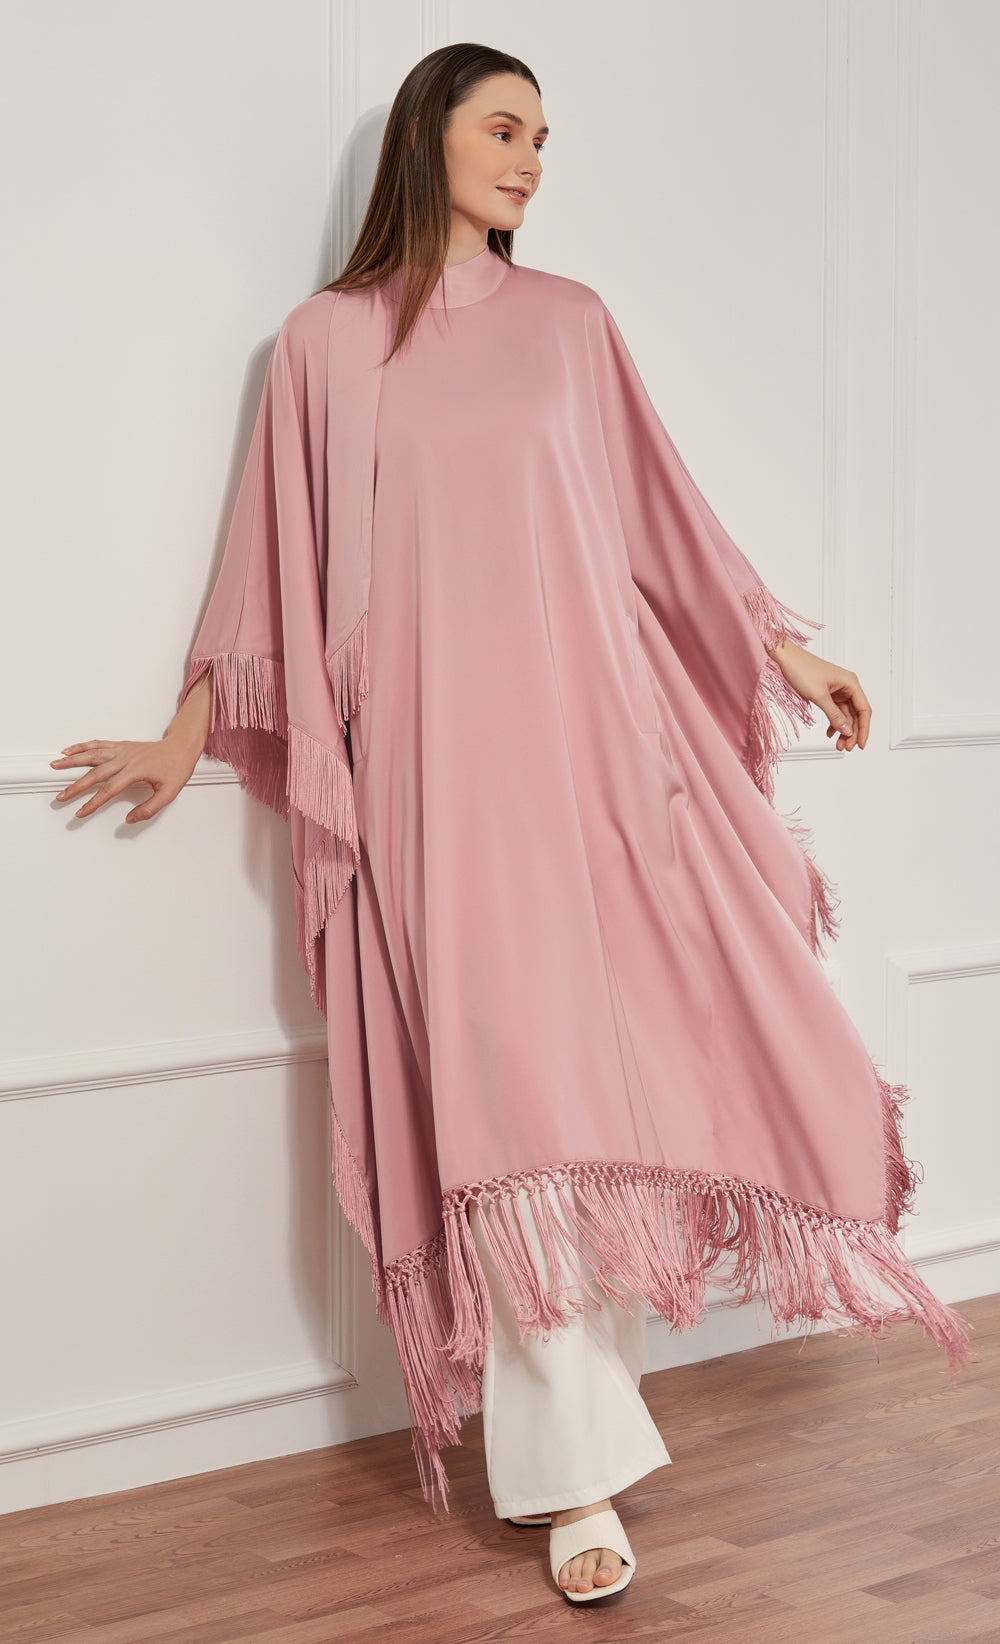 Fringe Tunic in Pink